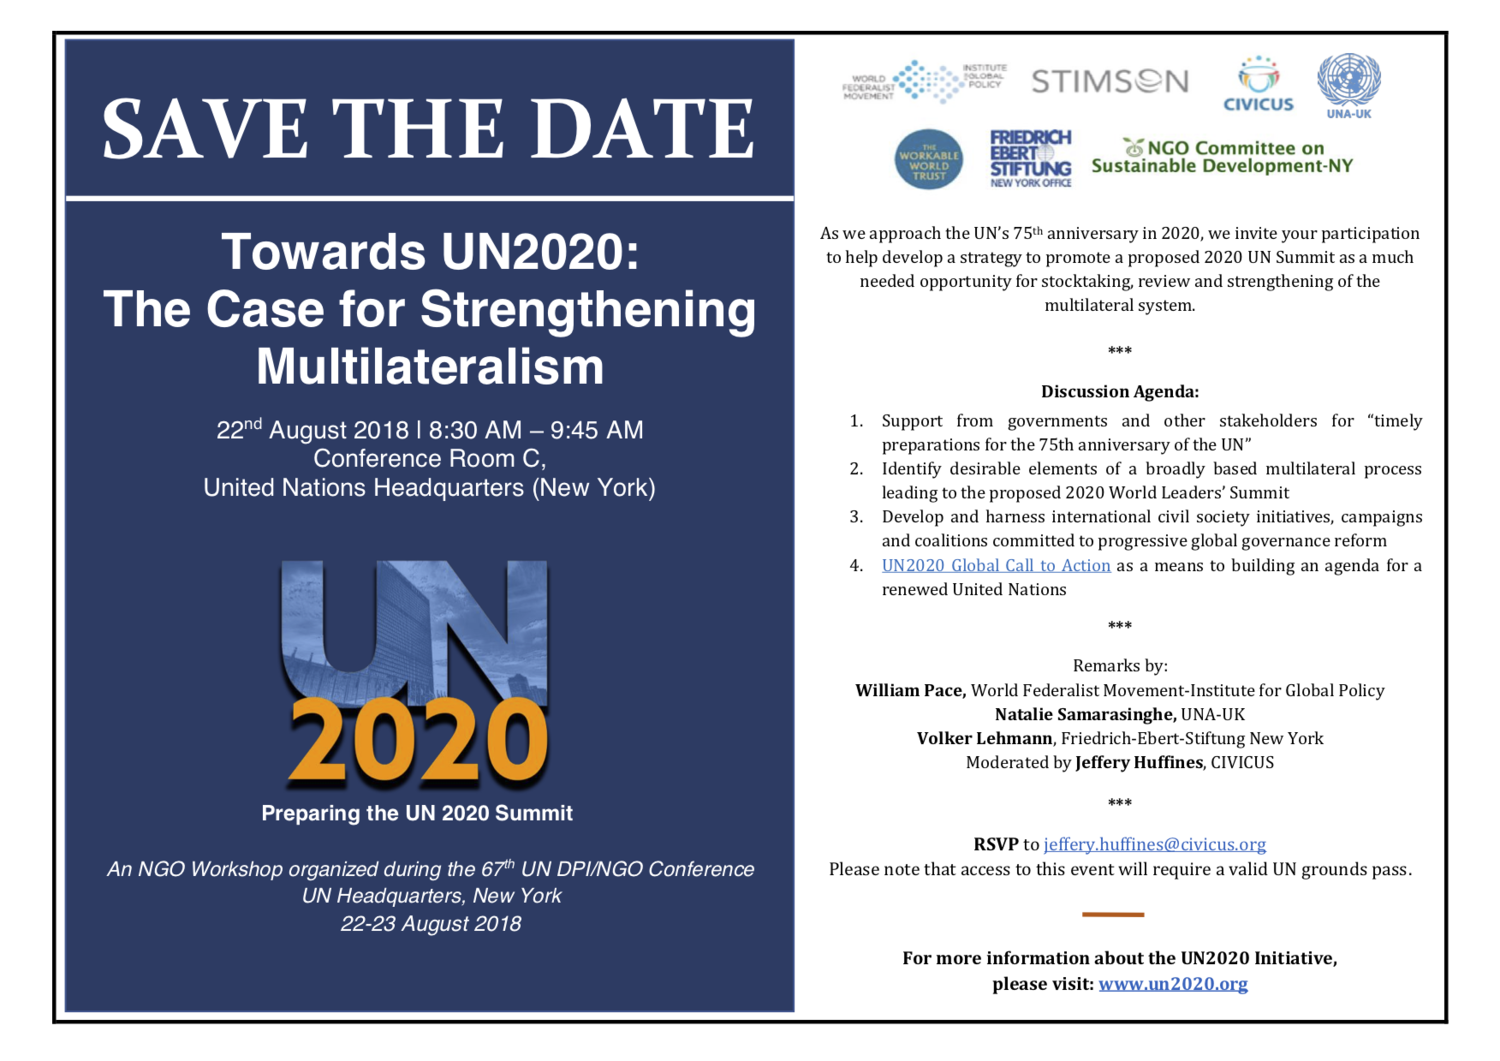 Save+the+Date_UN2020+&+The+Case+for+Strengthening+Multilateralism.png